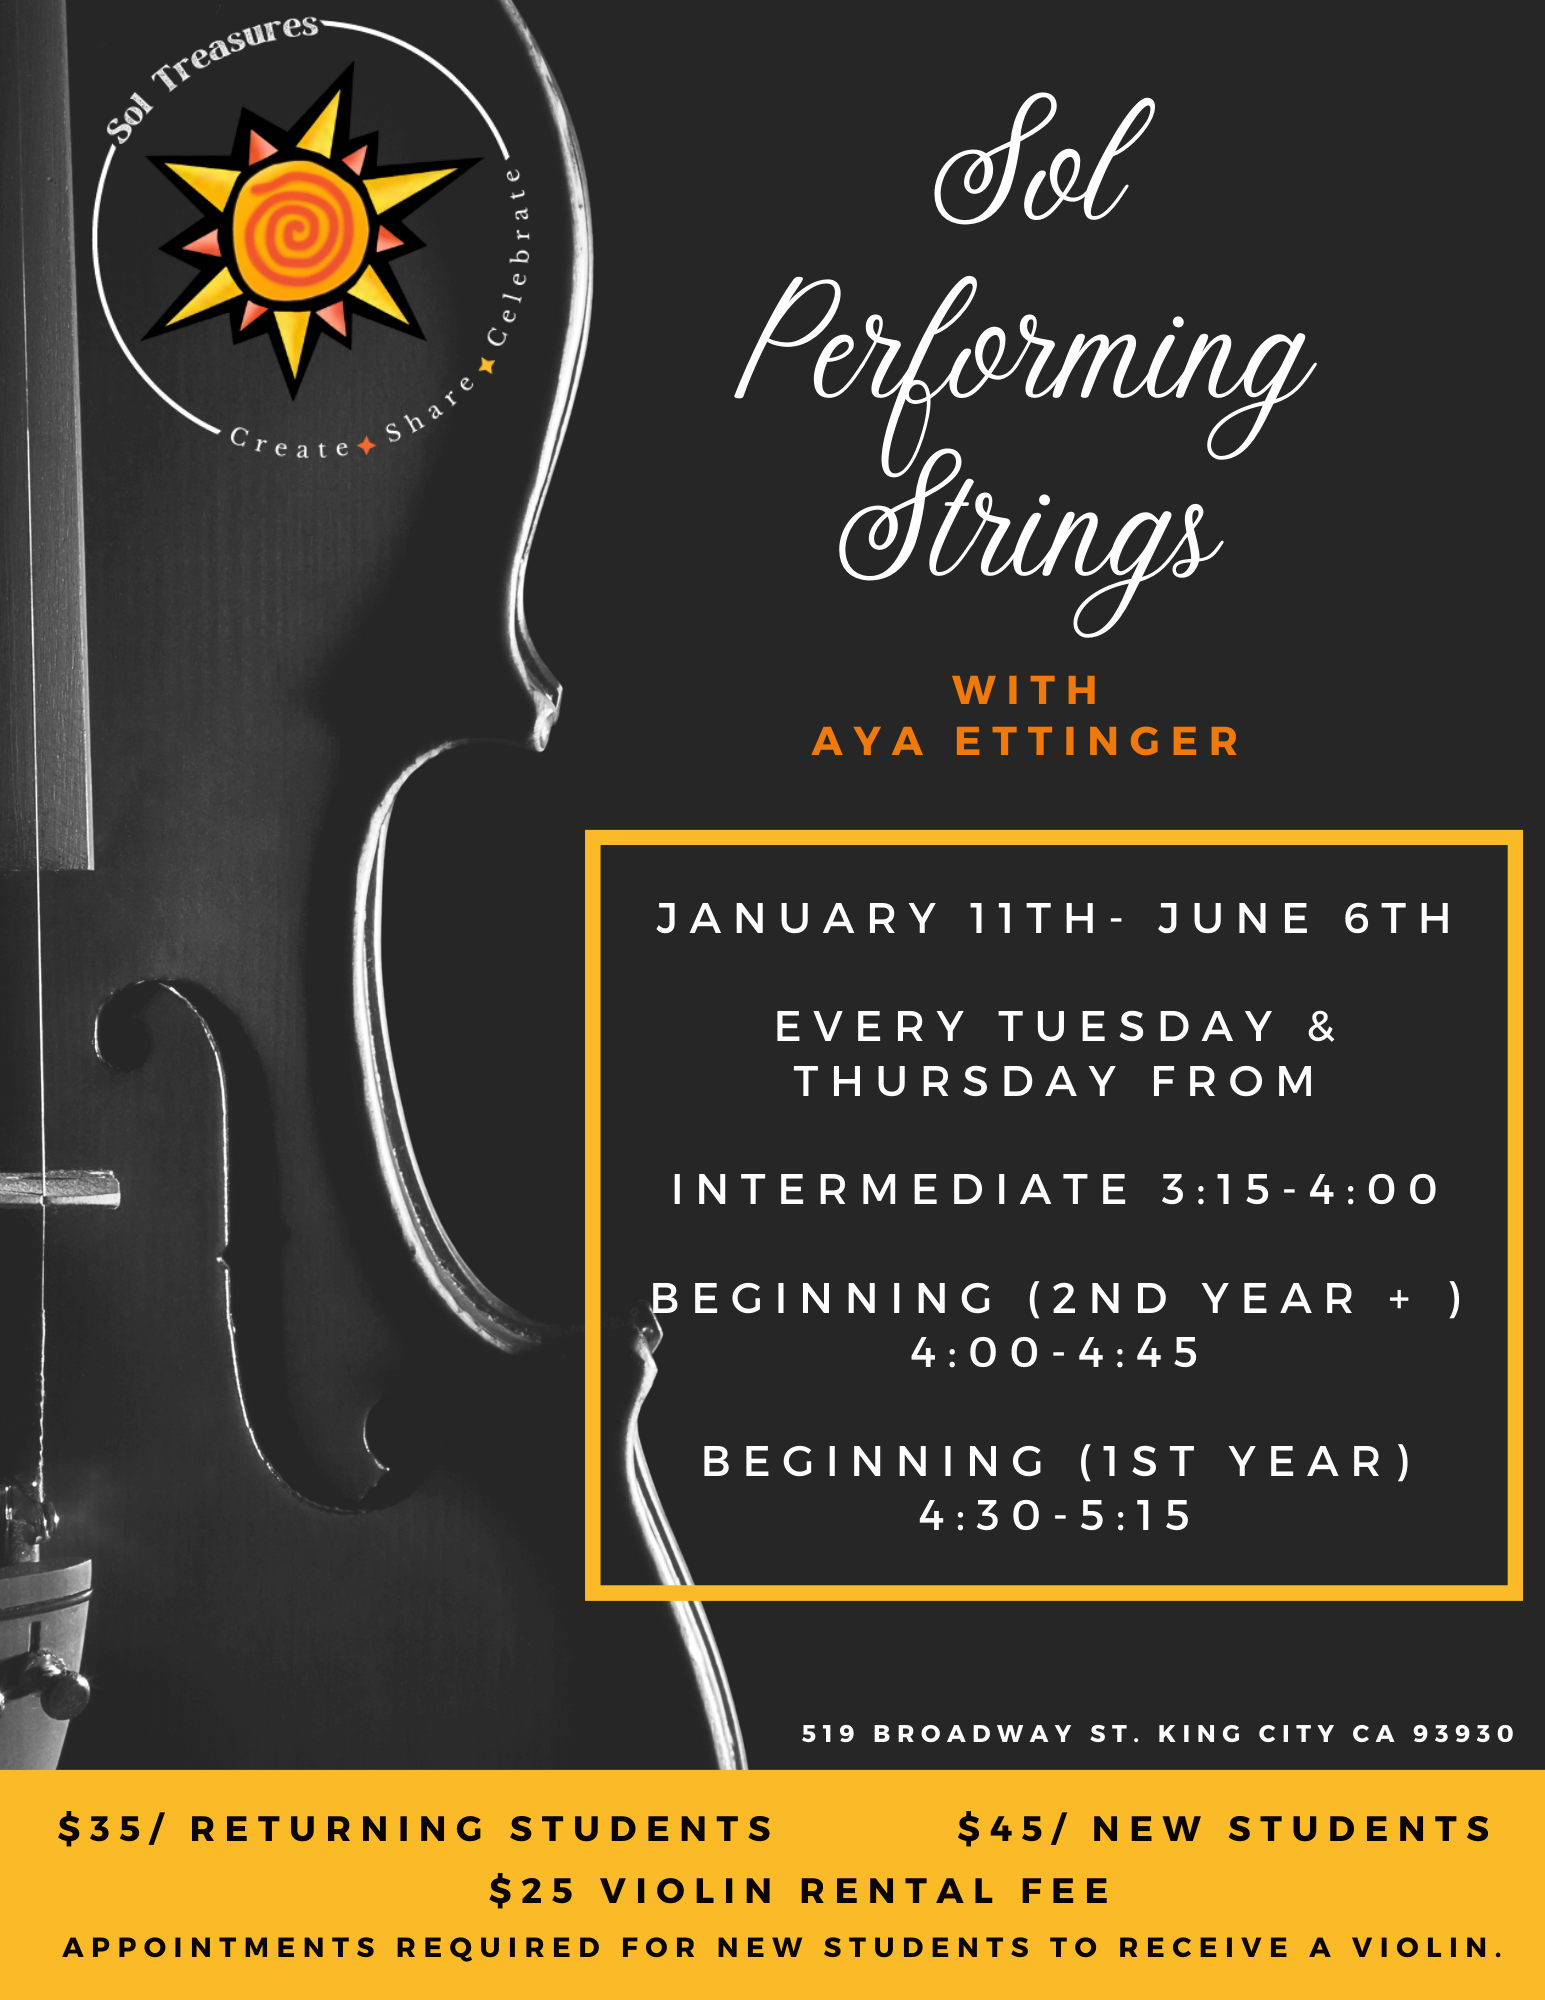 Events from February 24 – January 11 – Sol Treasures